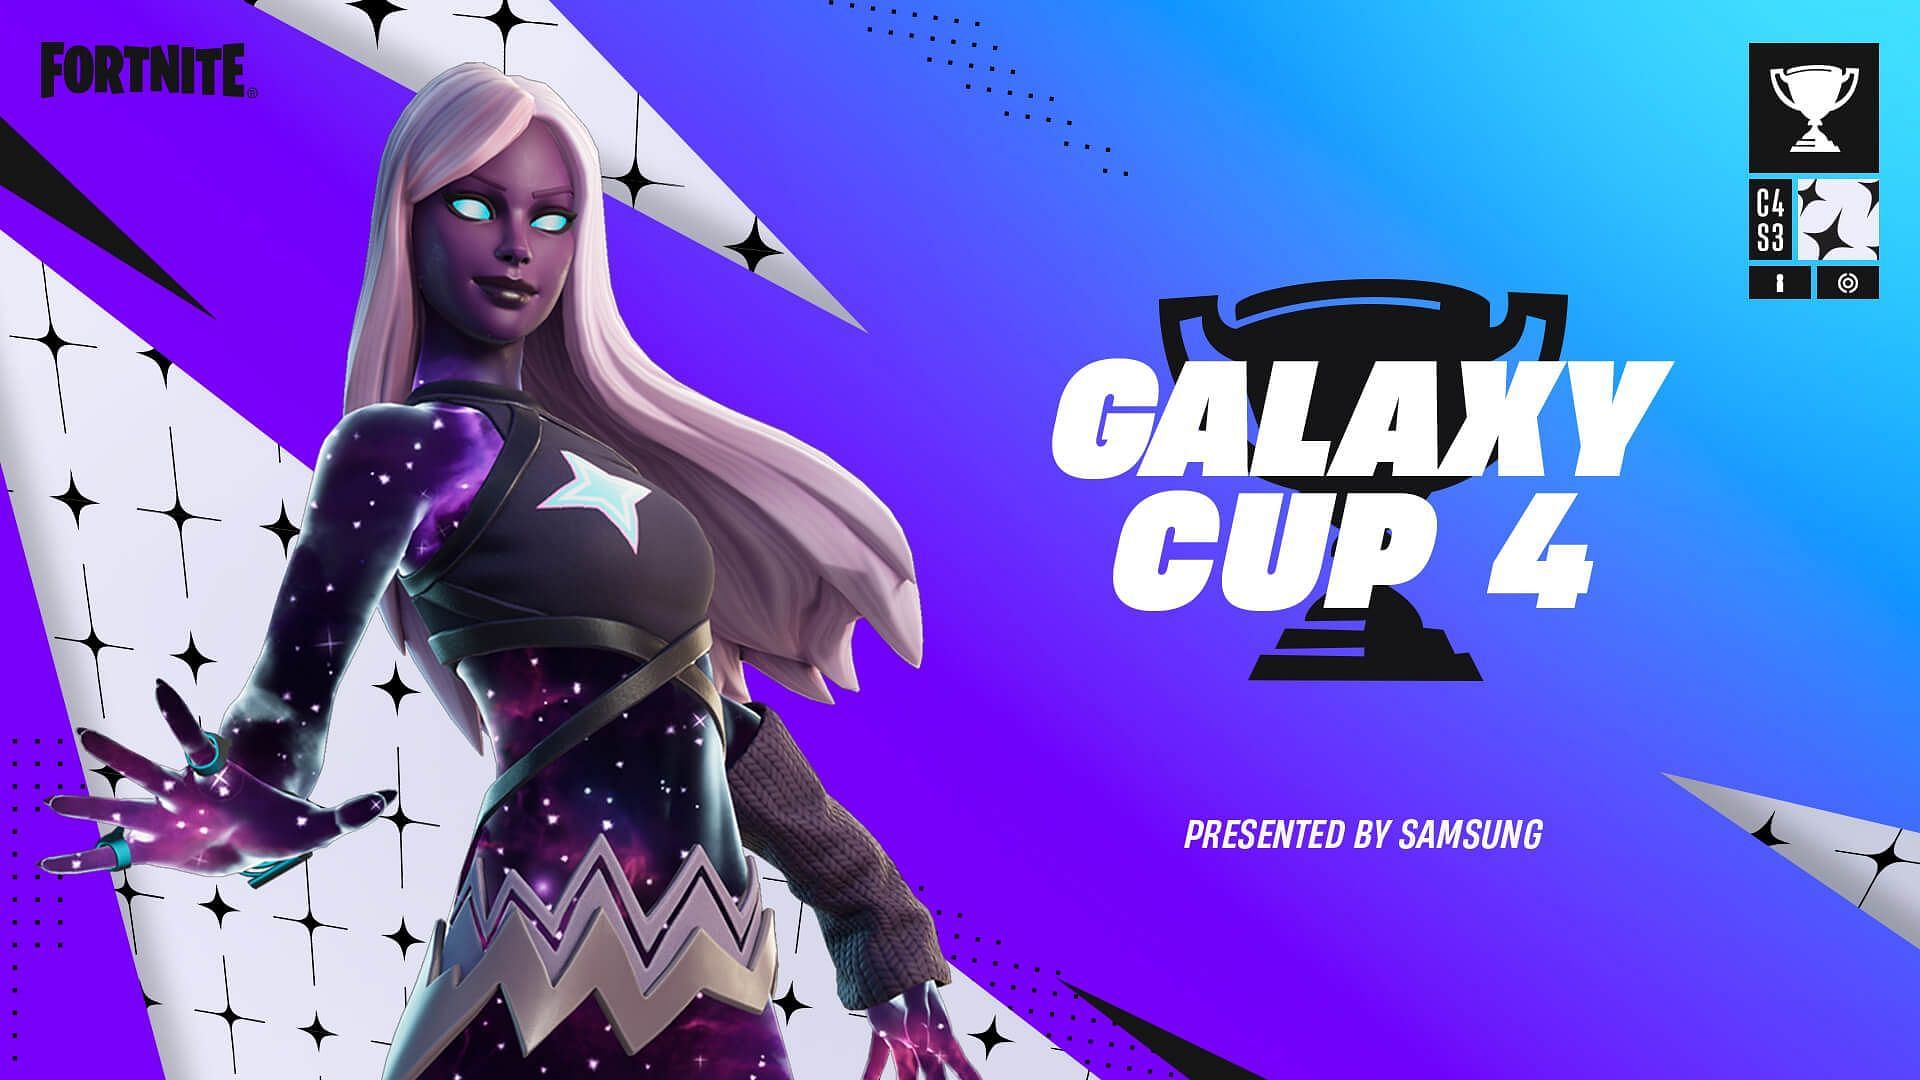 Someone cheated at the Fortnite Galaxy Cup 4 (Image via Epic Games)